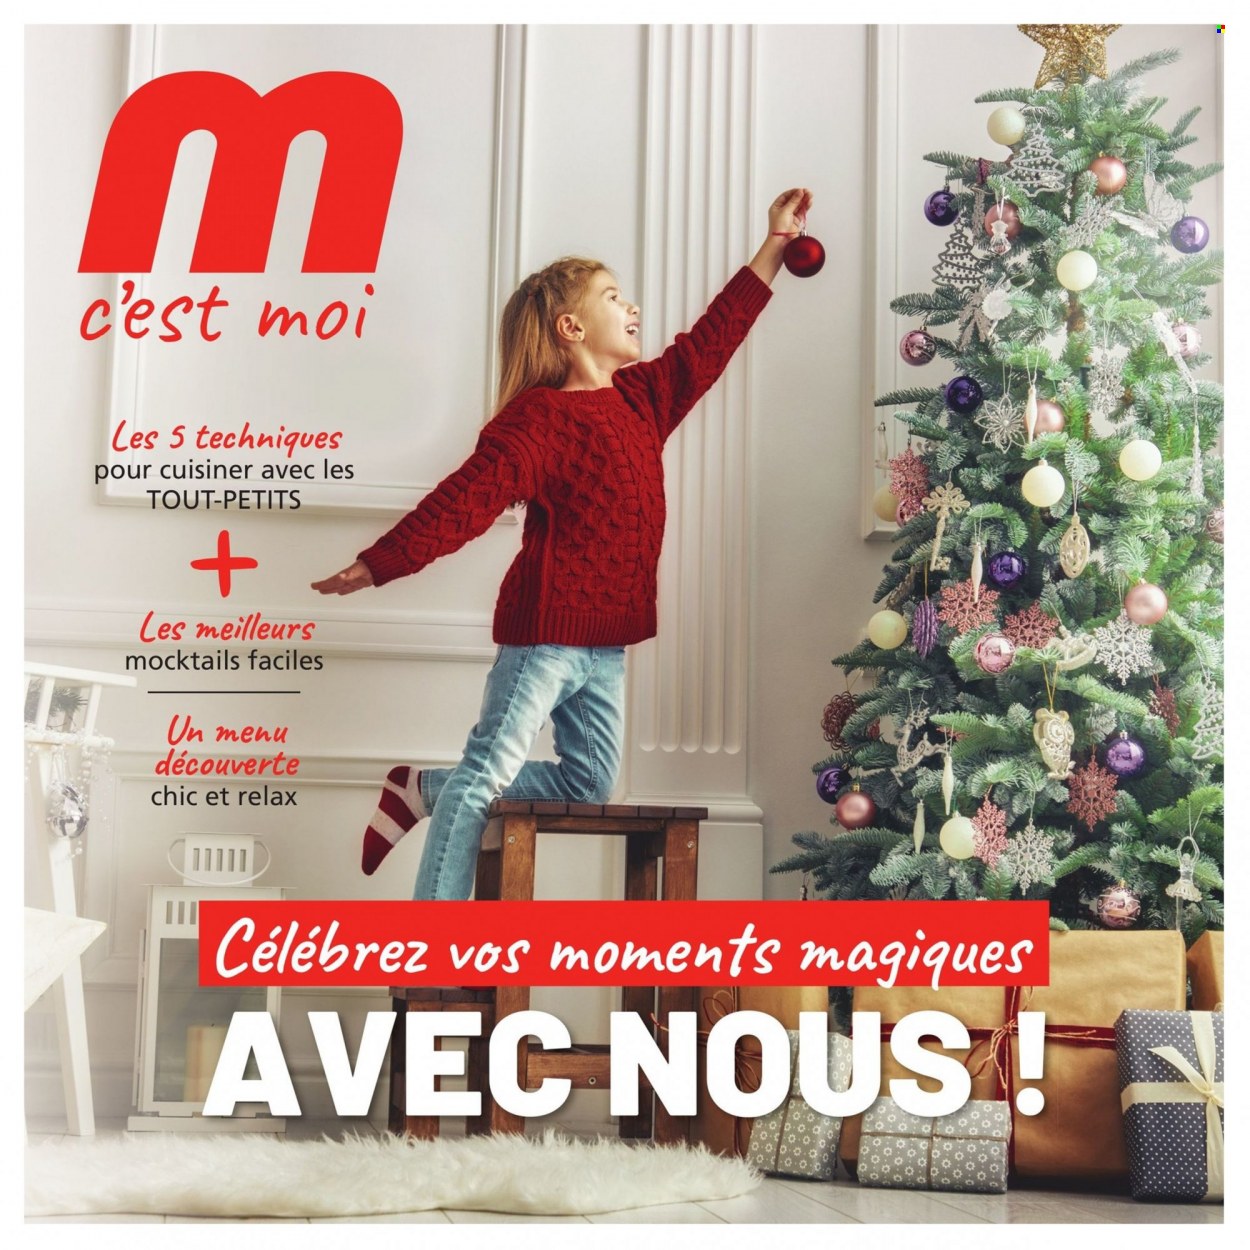 Metro Flyer - November 18, 2021 - December 15, 2021 - Sales products - Moments. Page 1.